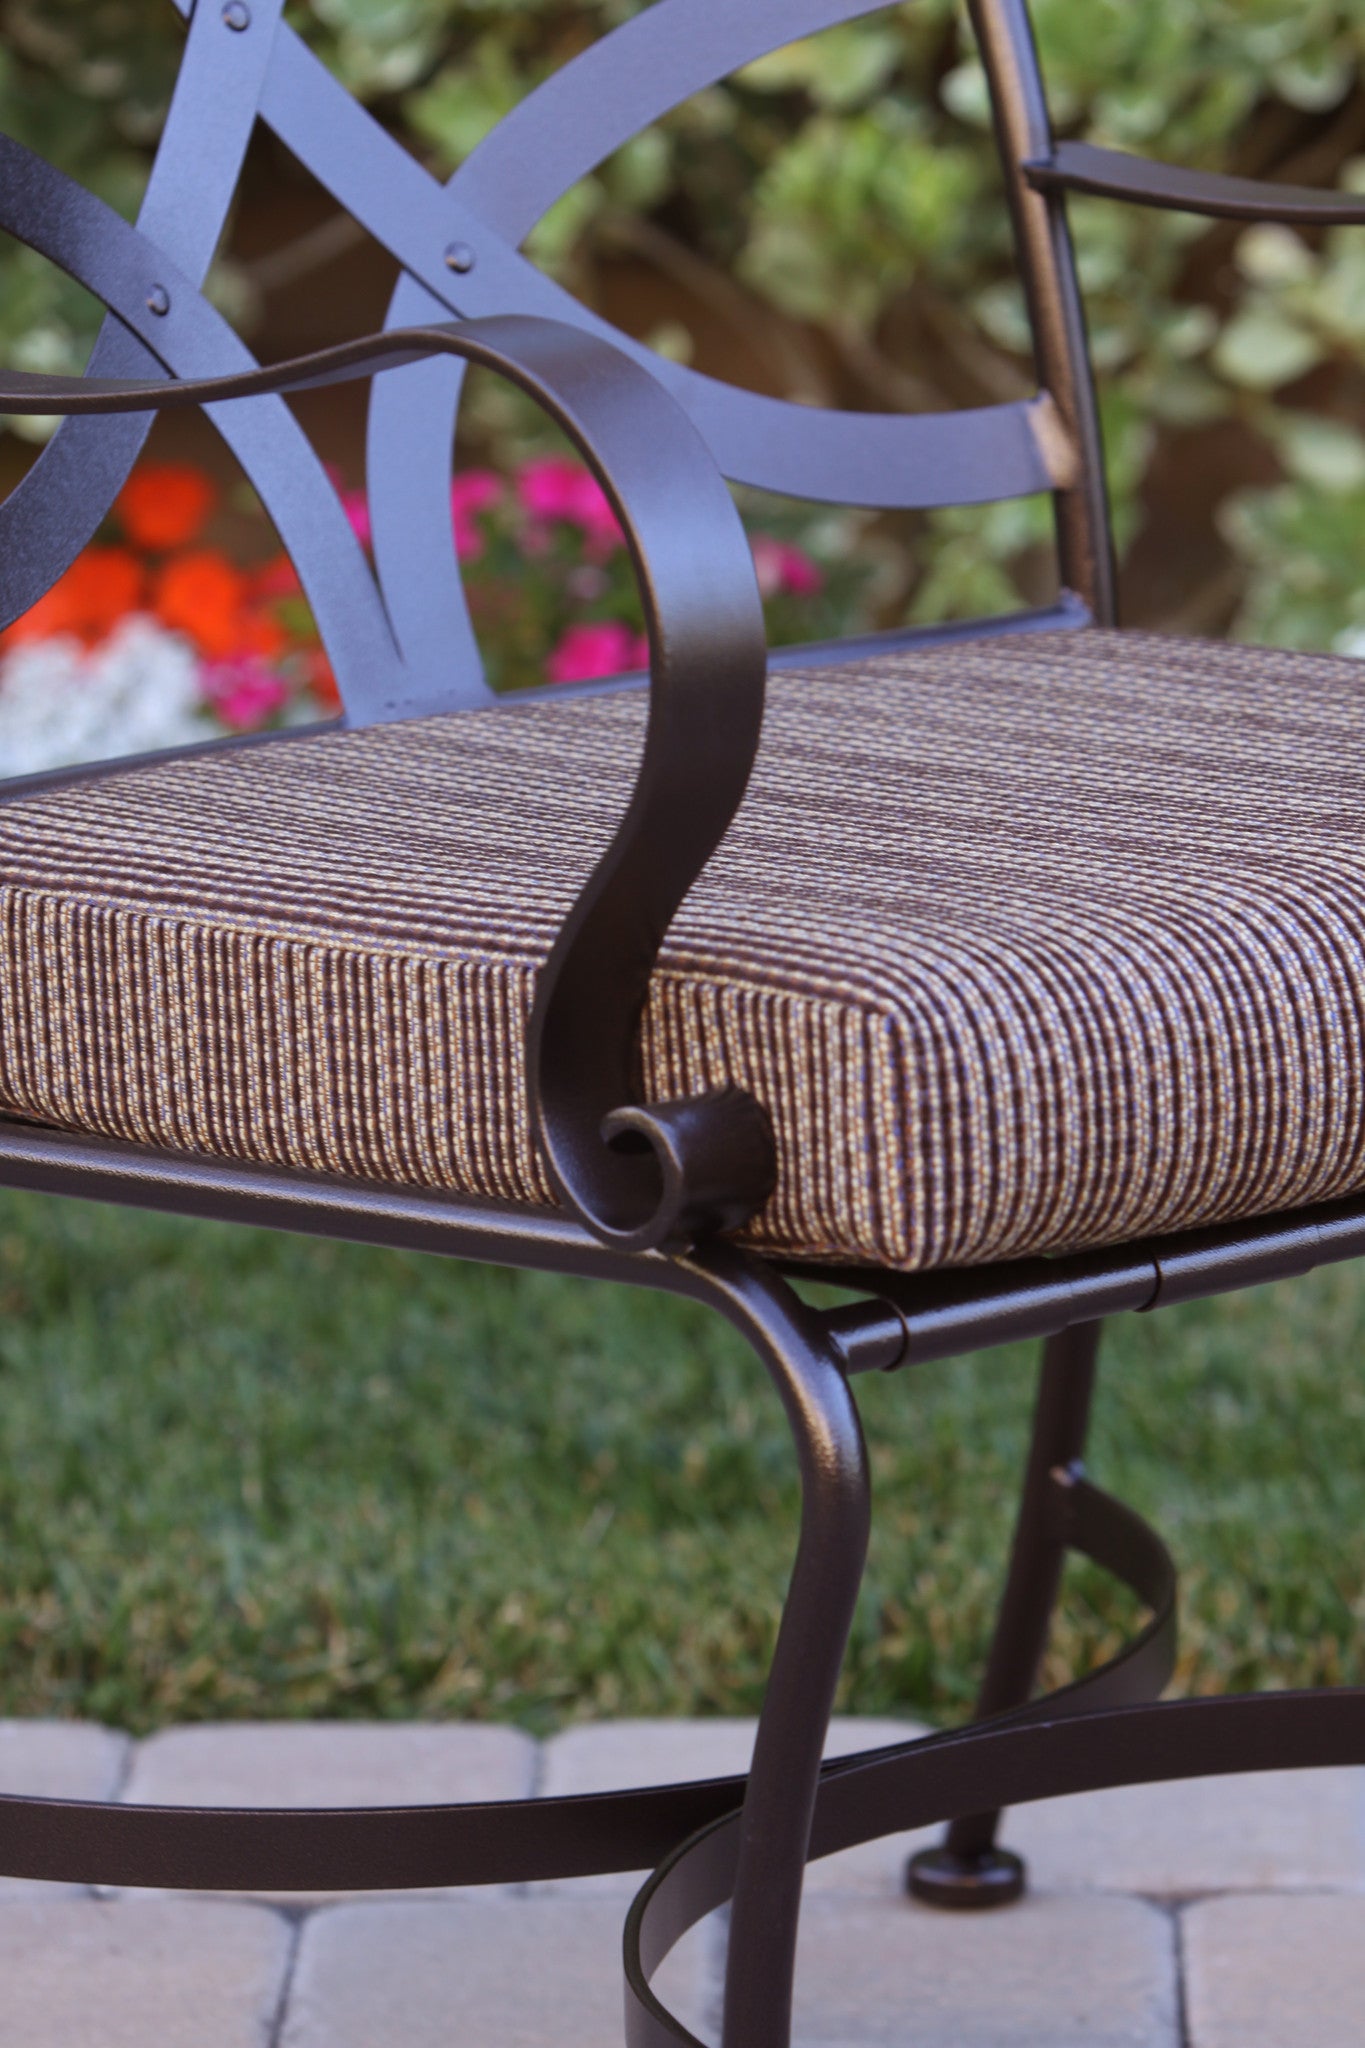 O.W. Lee's Marquette Outdoor Patio Dining Arm Chair is available at Jacobs Custom Living.